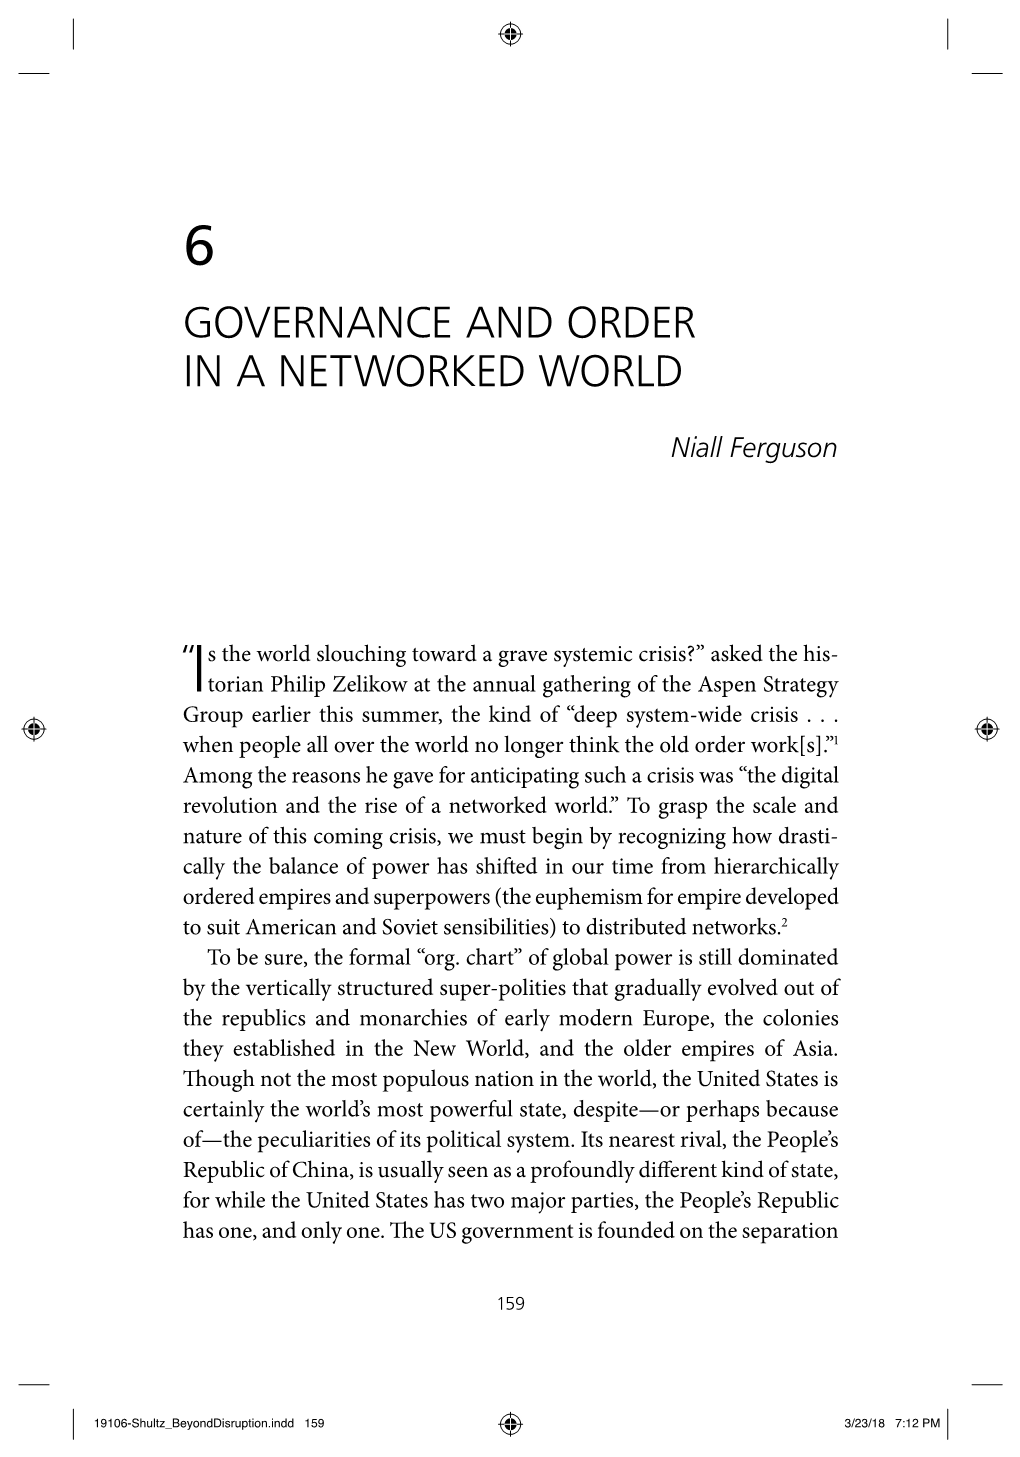 CHAPTER 6: Governance and Order in a Networked World